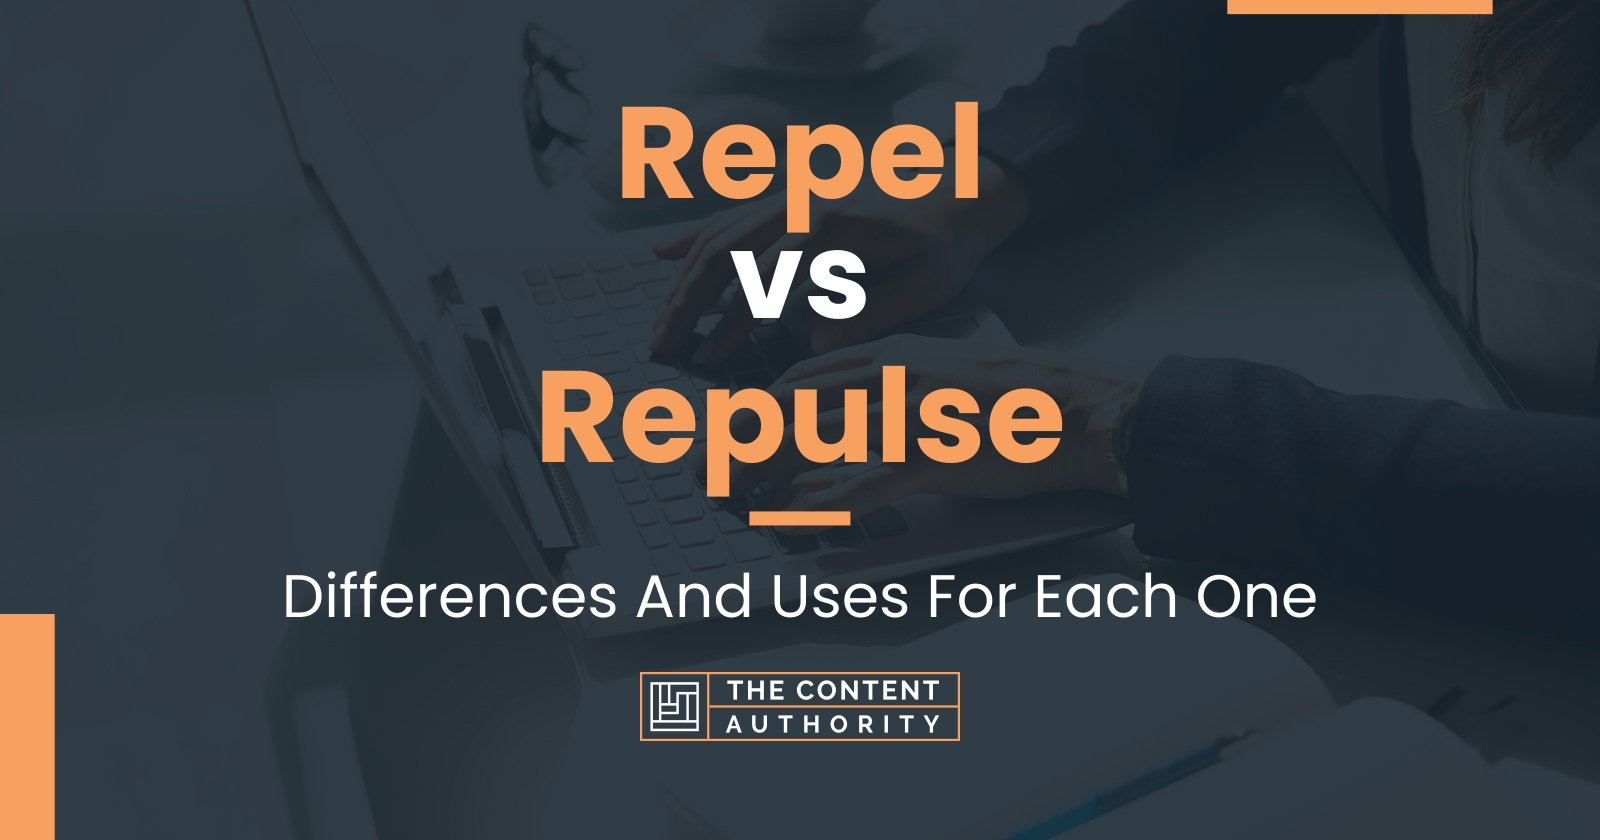 Repel vs Repulse: Differences And Uses For Each One